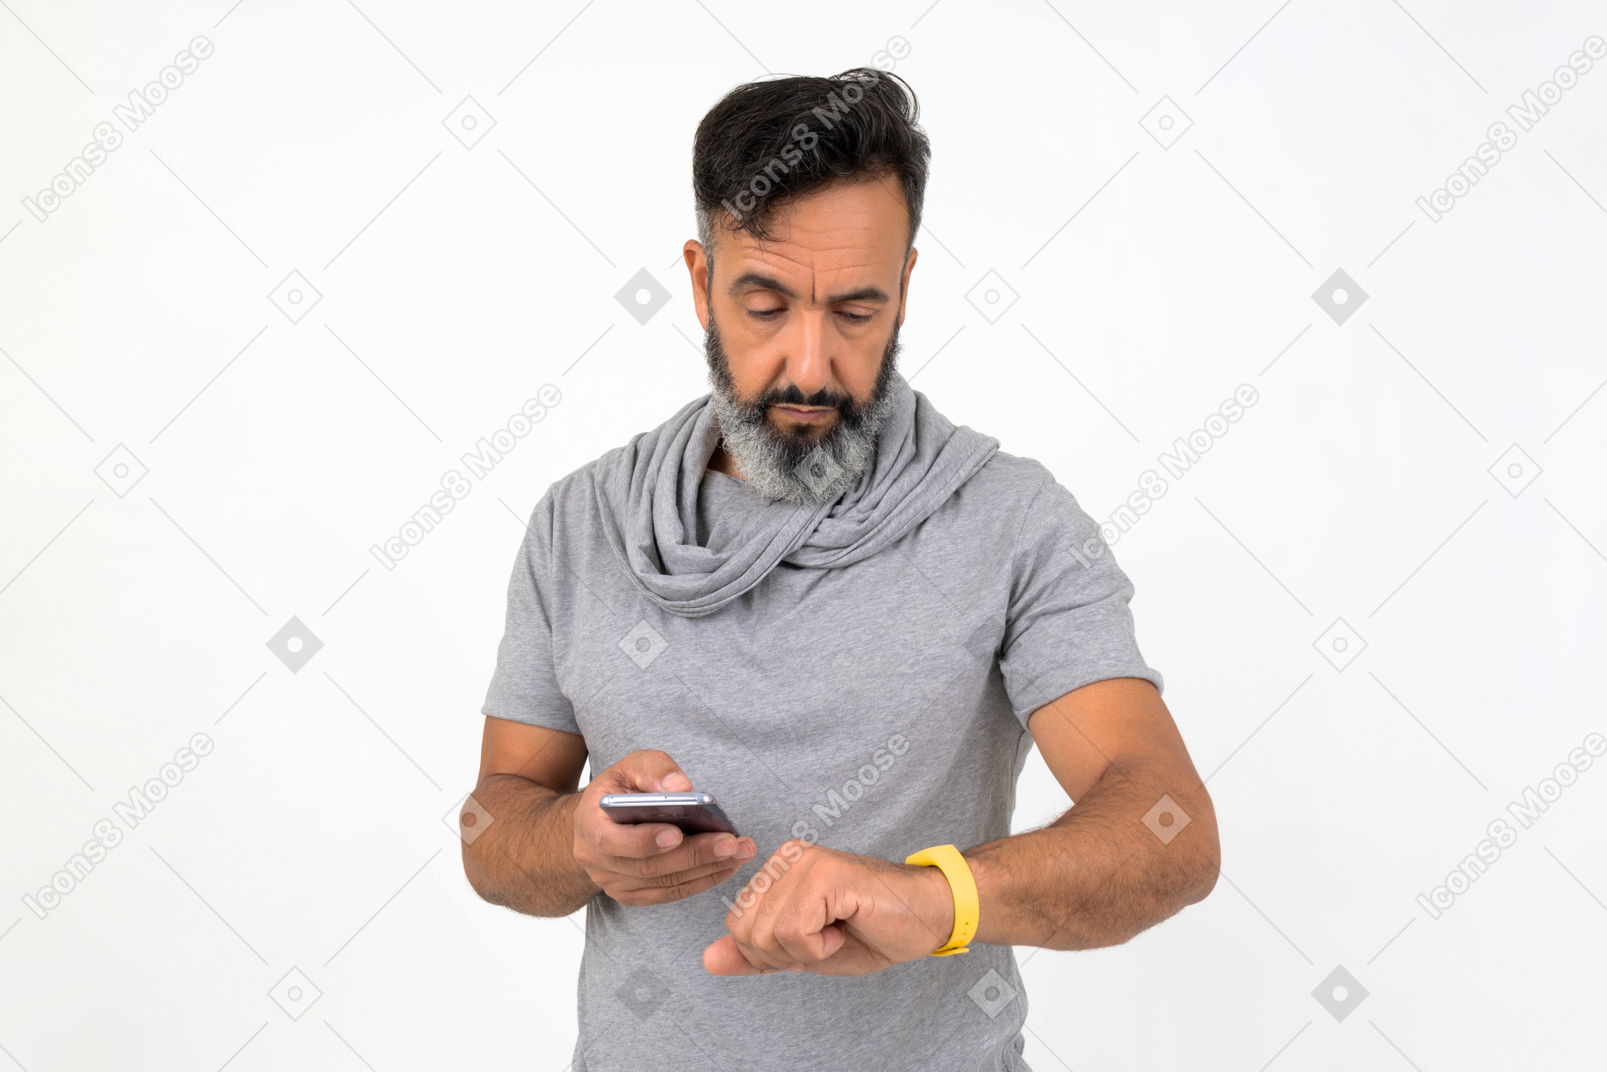 Mature man looking at his sport tracker with surprisement